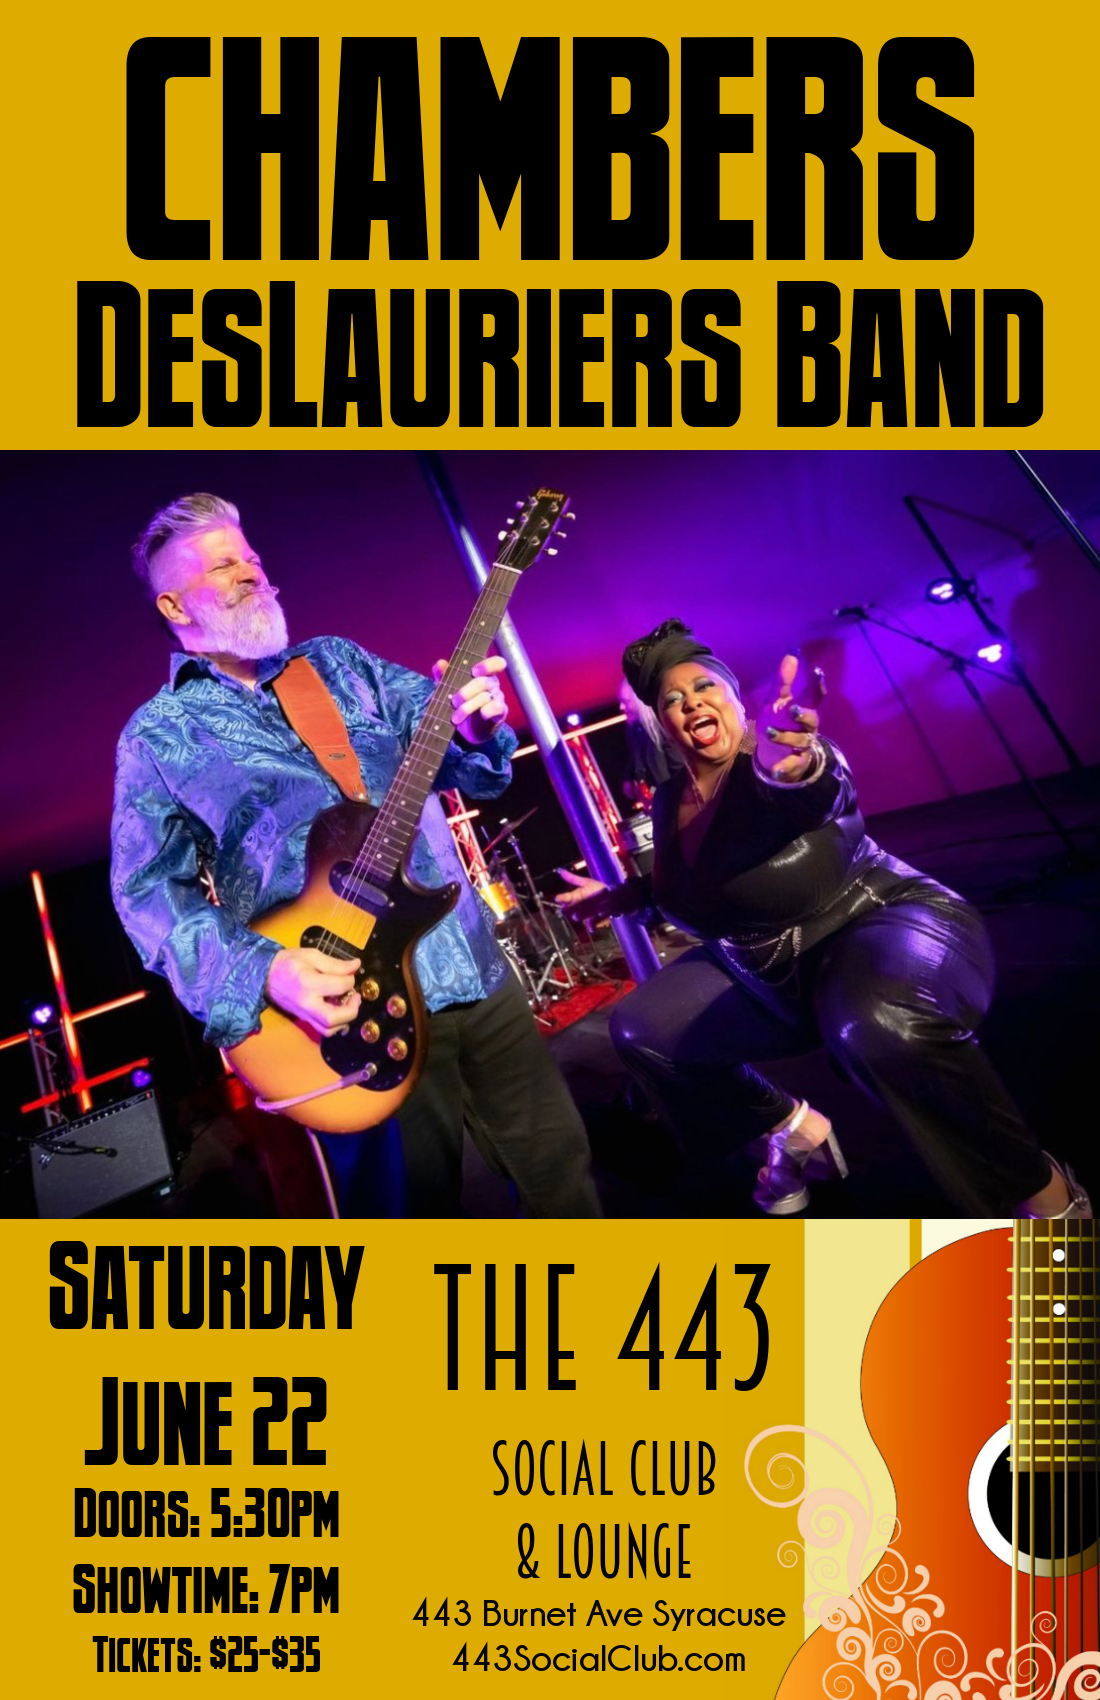 Chambers DesLauriers Band